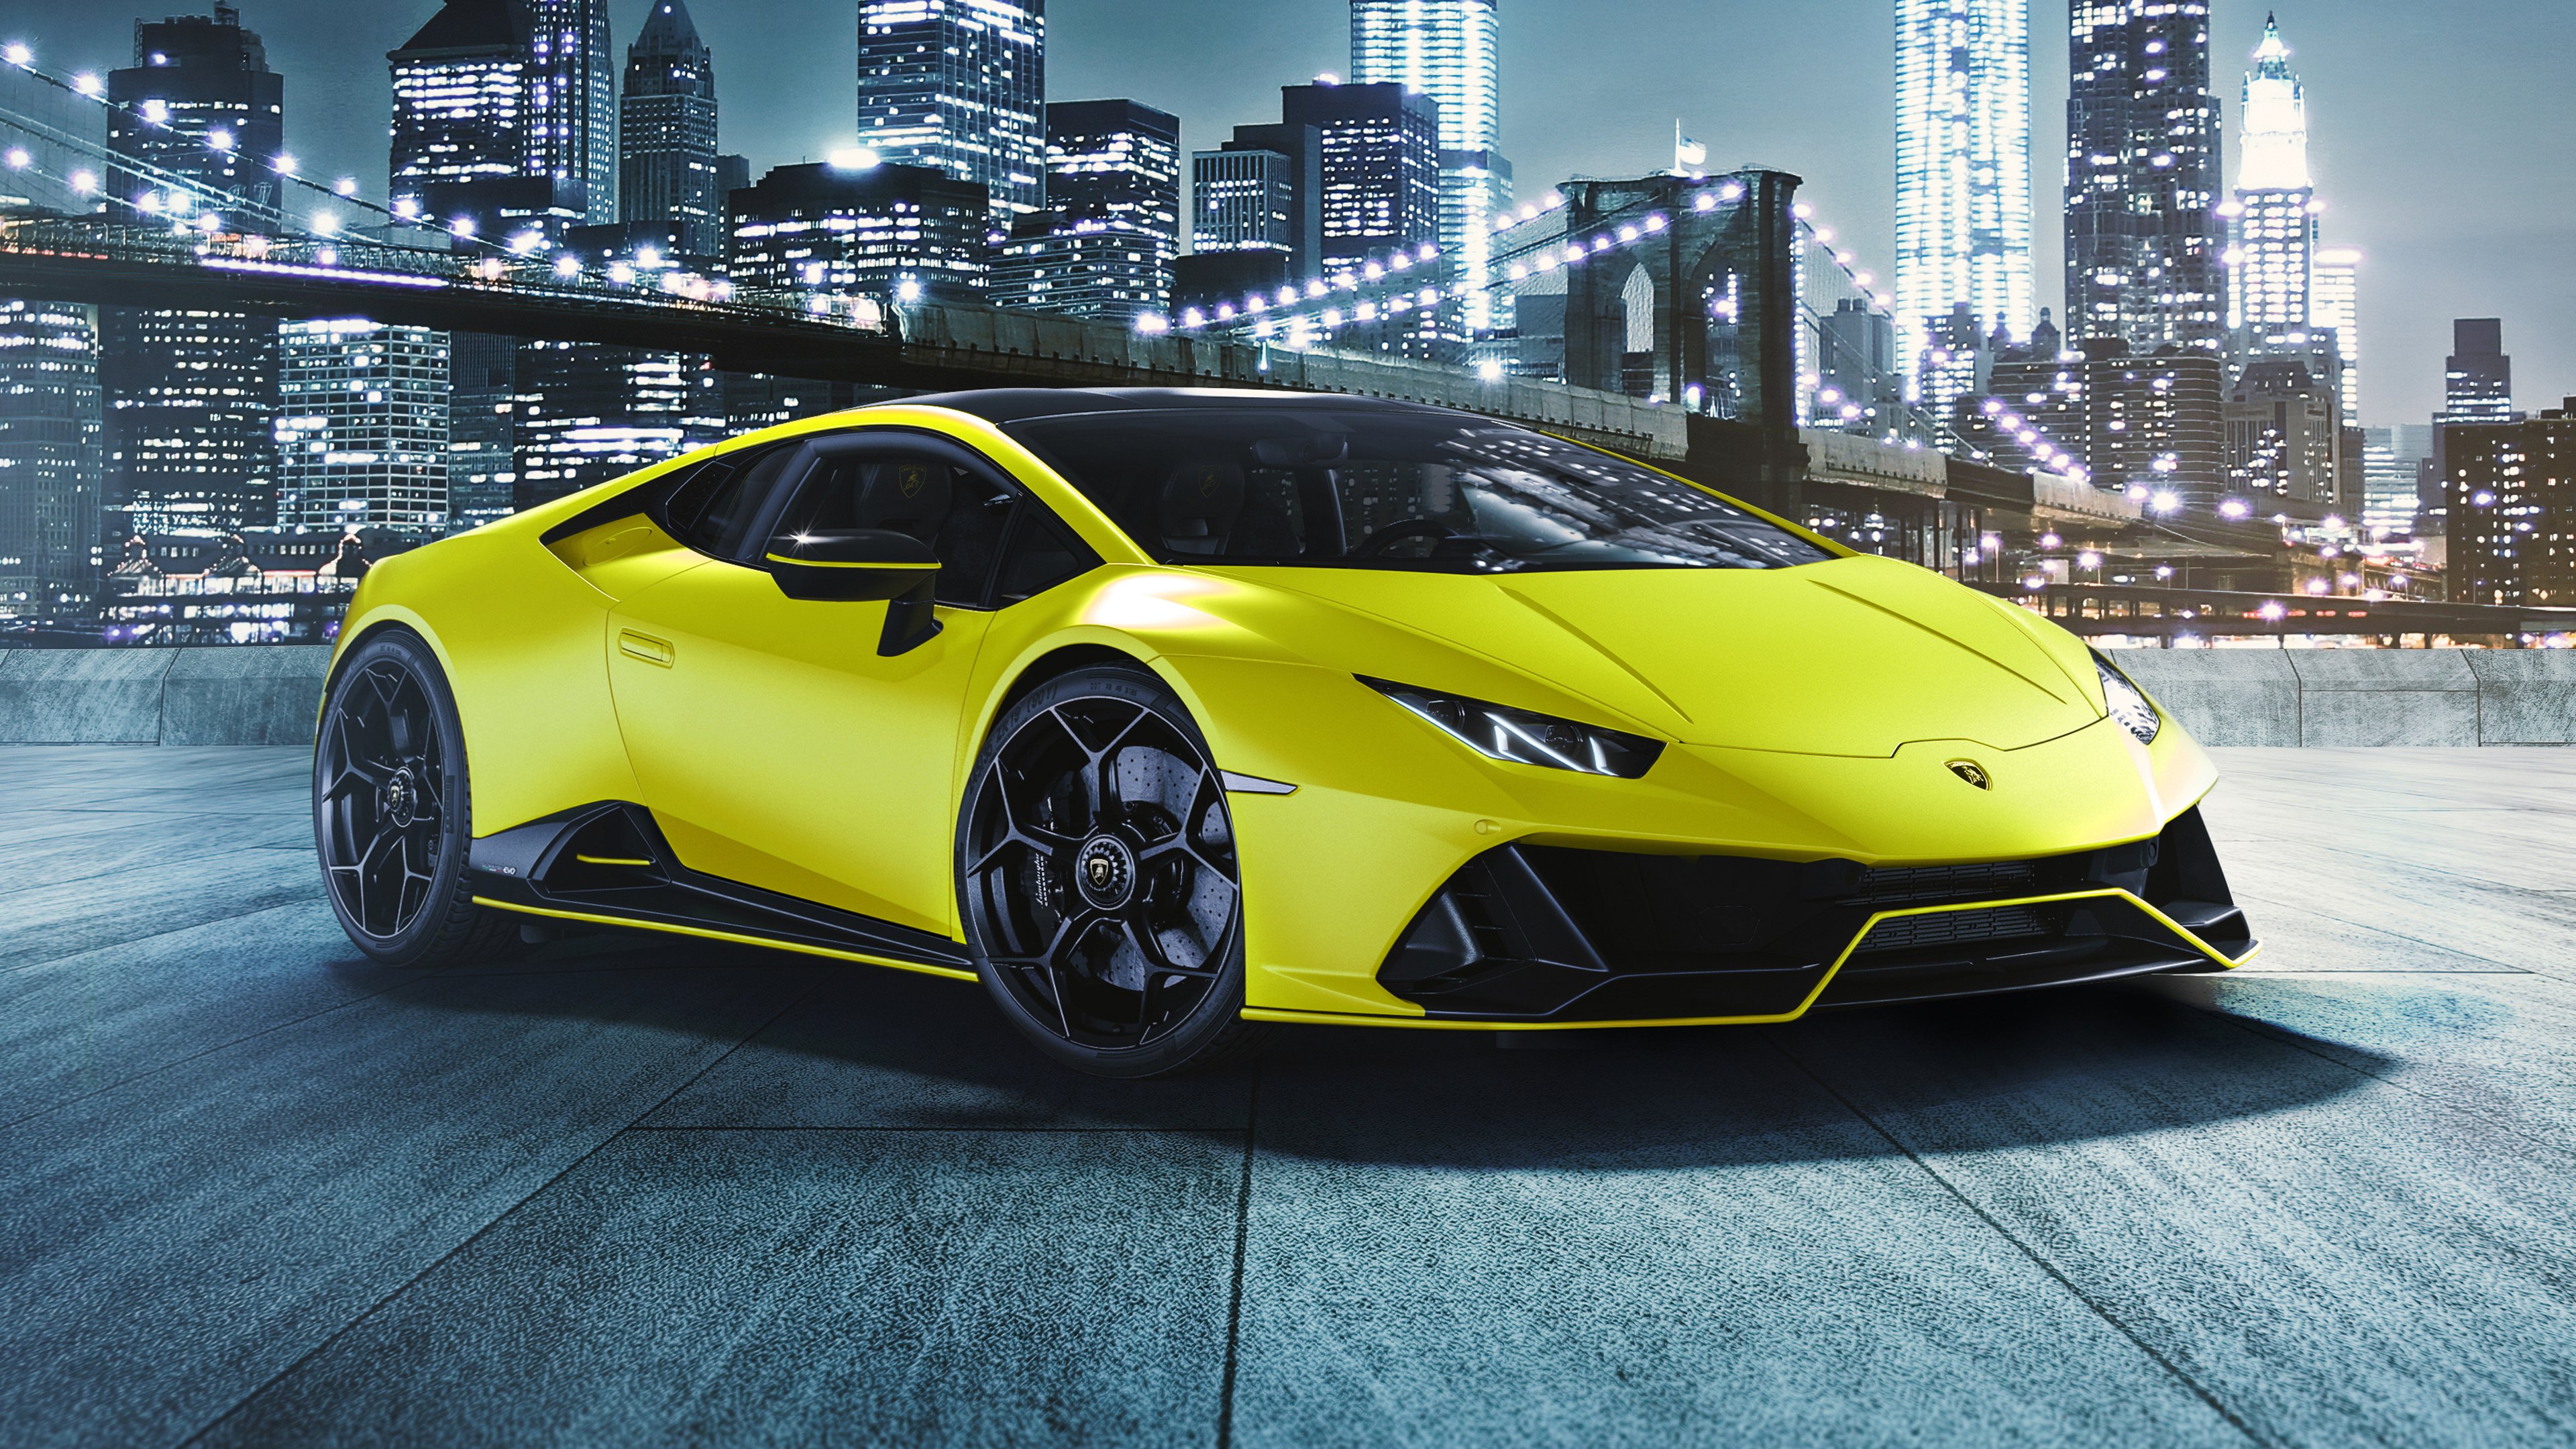 Lamborghini Huracán EVO yellow car against city background wallpaper and image, picture, photo